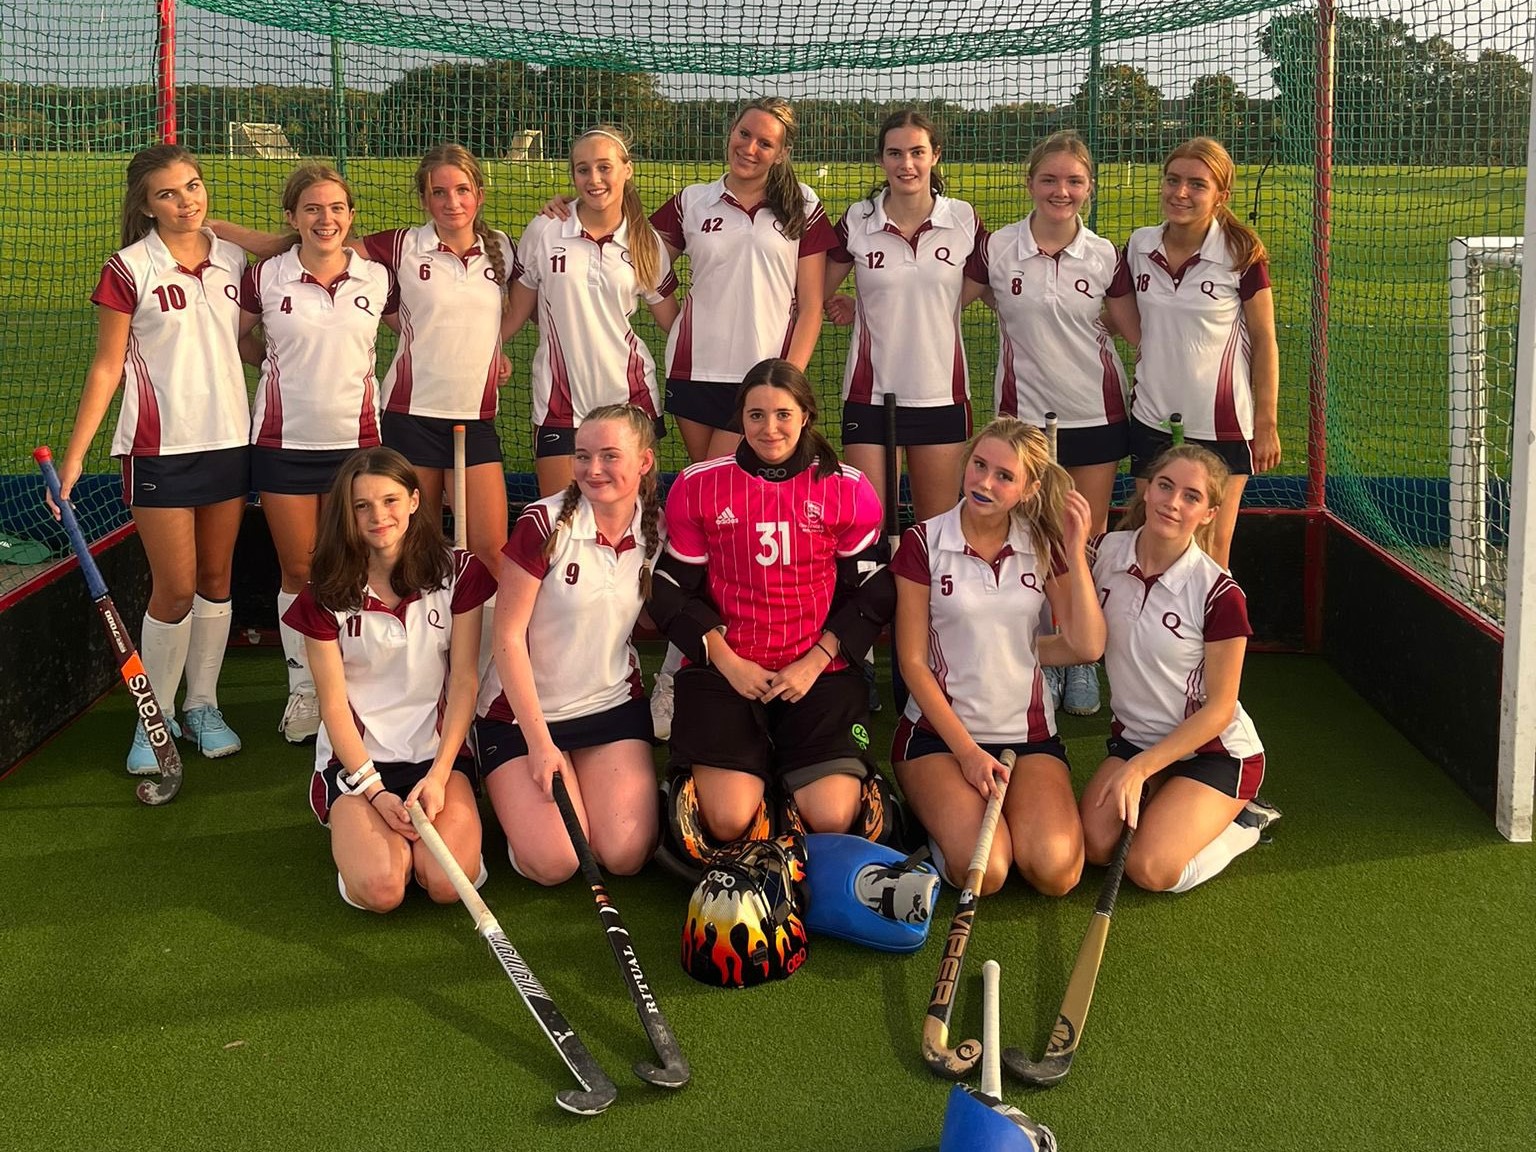 U16 hockey team at the Chester and District hockey championship